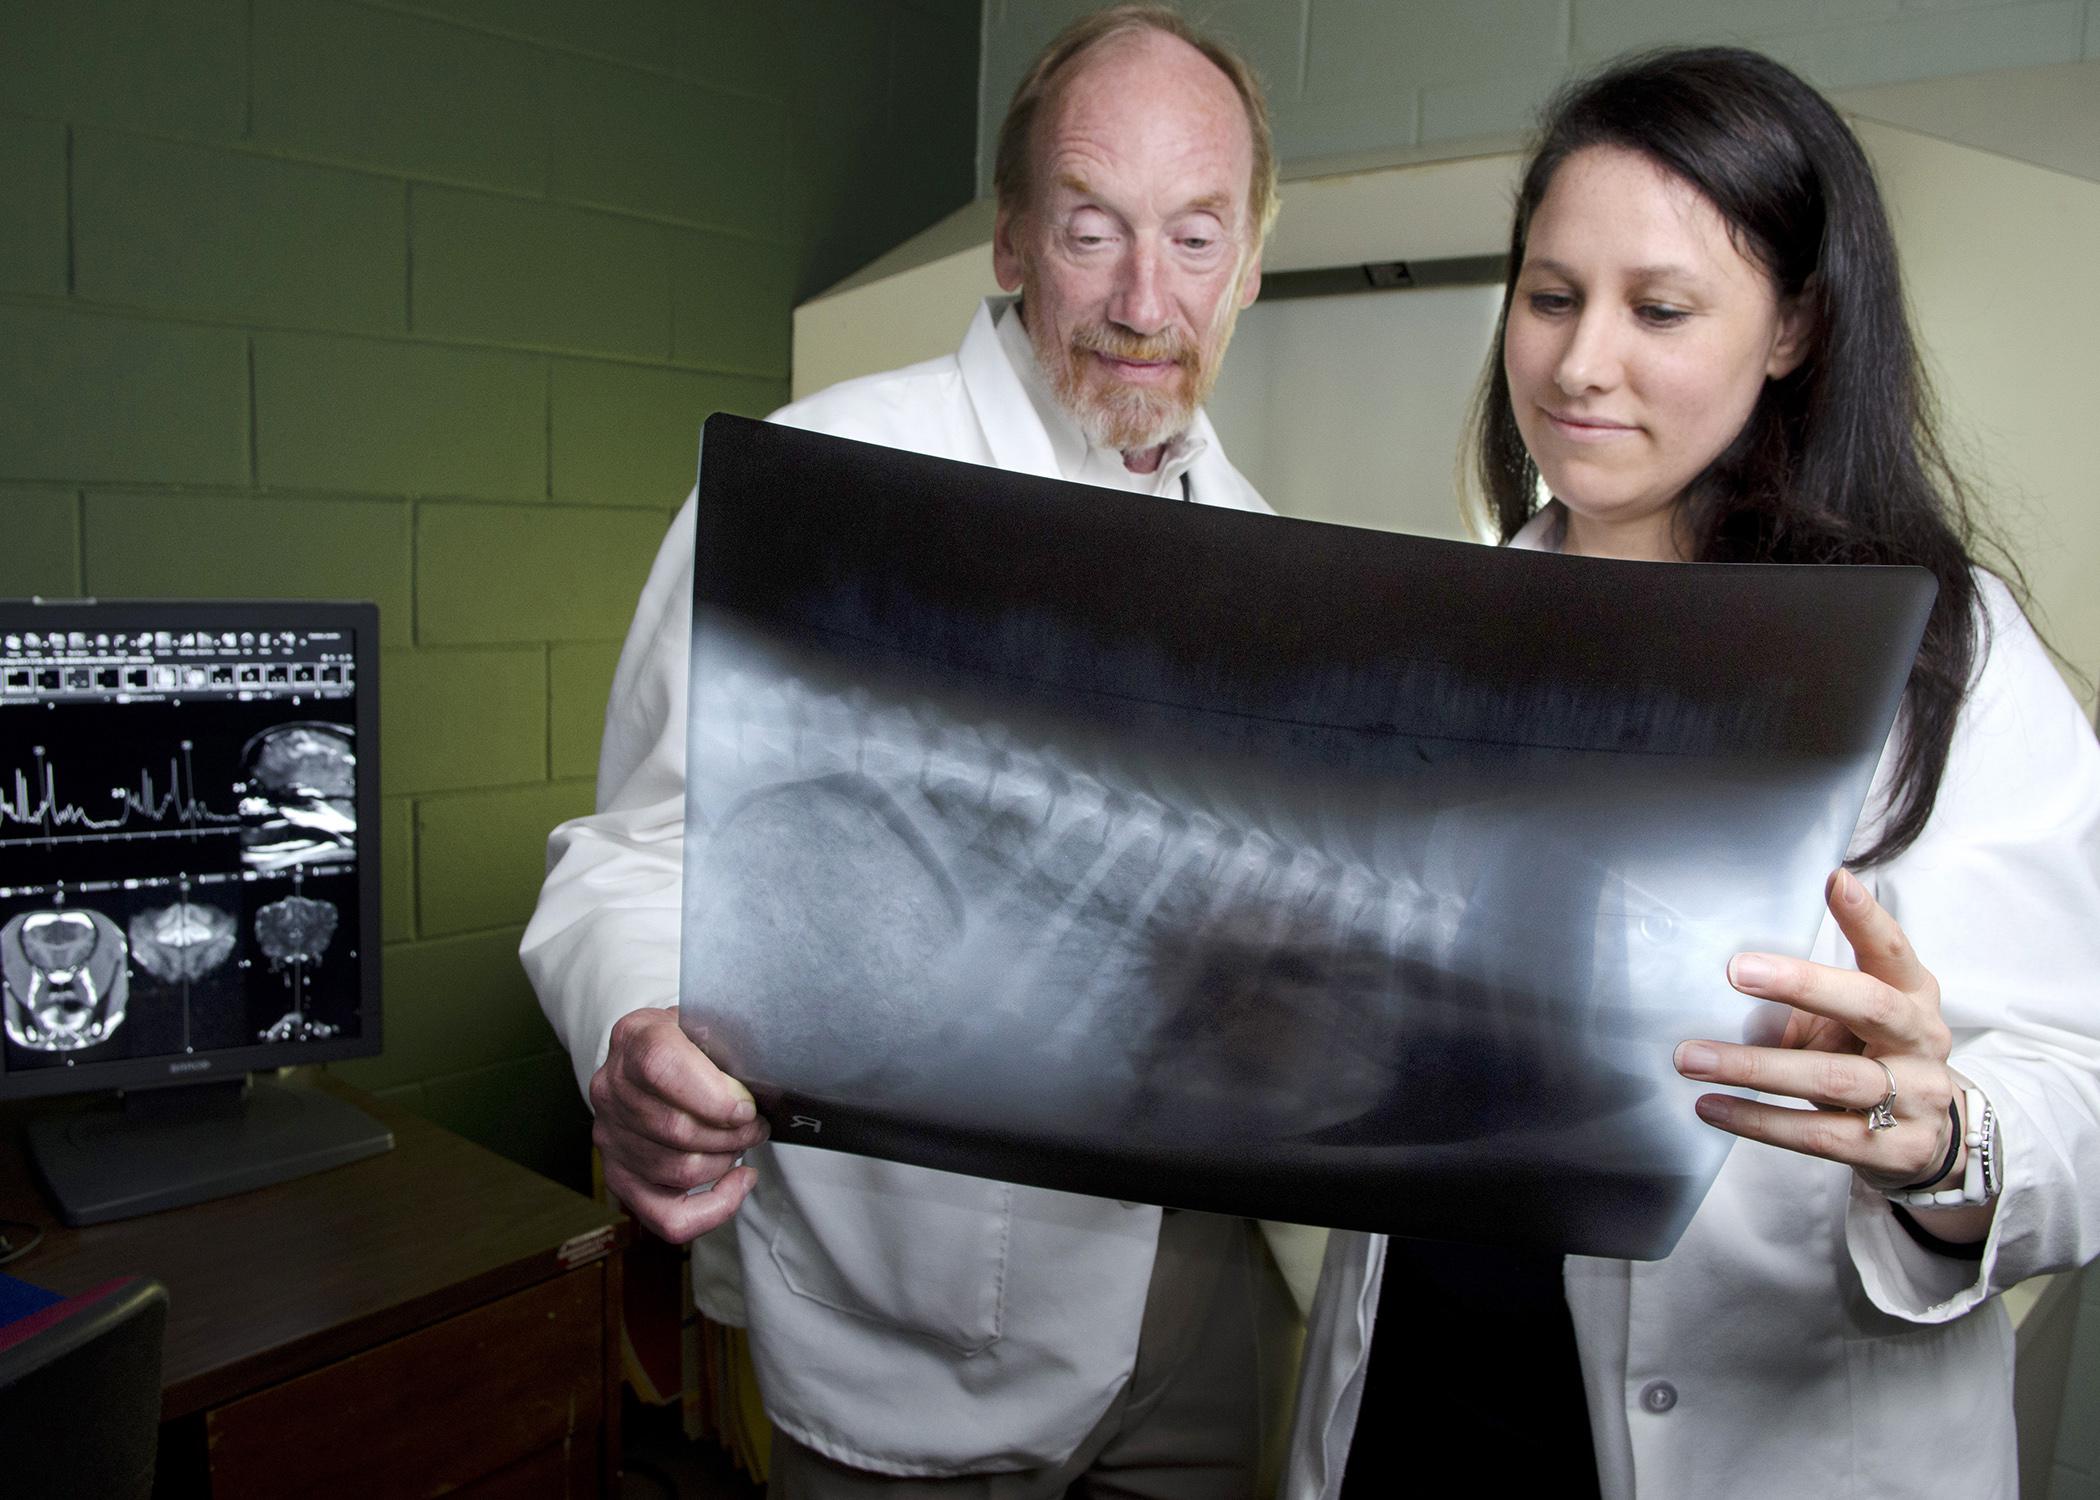 Dr. Andy Shores and Dr. Jennifer Gambino, both with the Mississippi State University College of Veterinary Medicine, examine a patient's MRI. (MSU College of Veterinary Medicine/Tom Thompson)